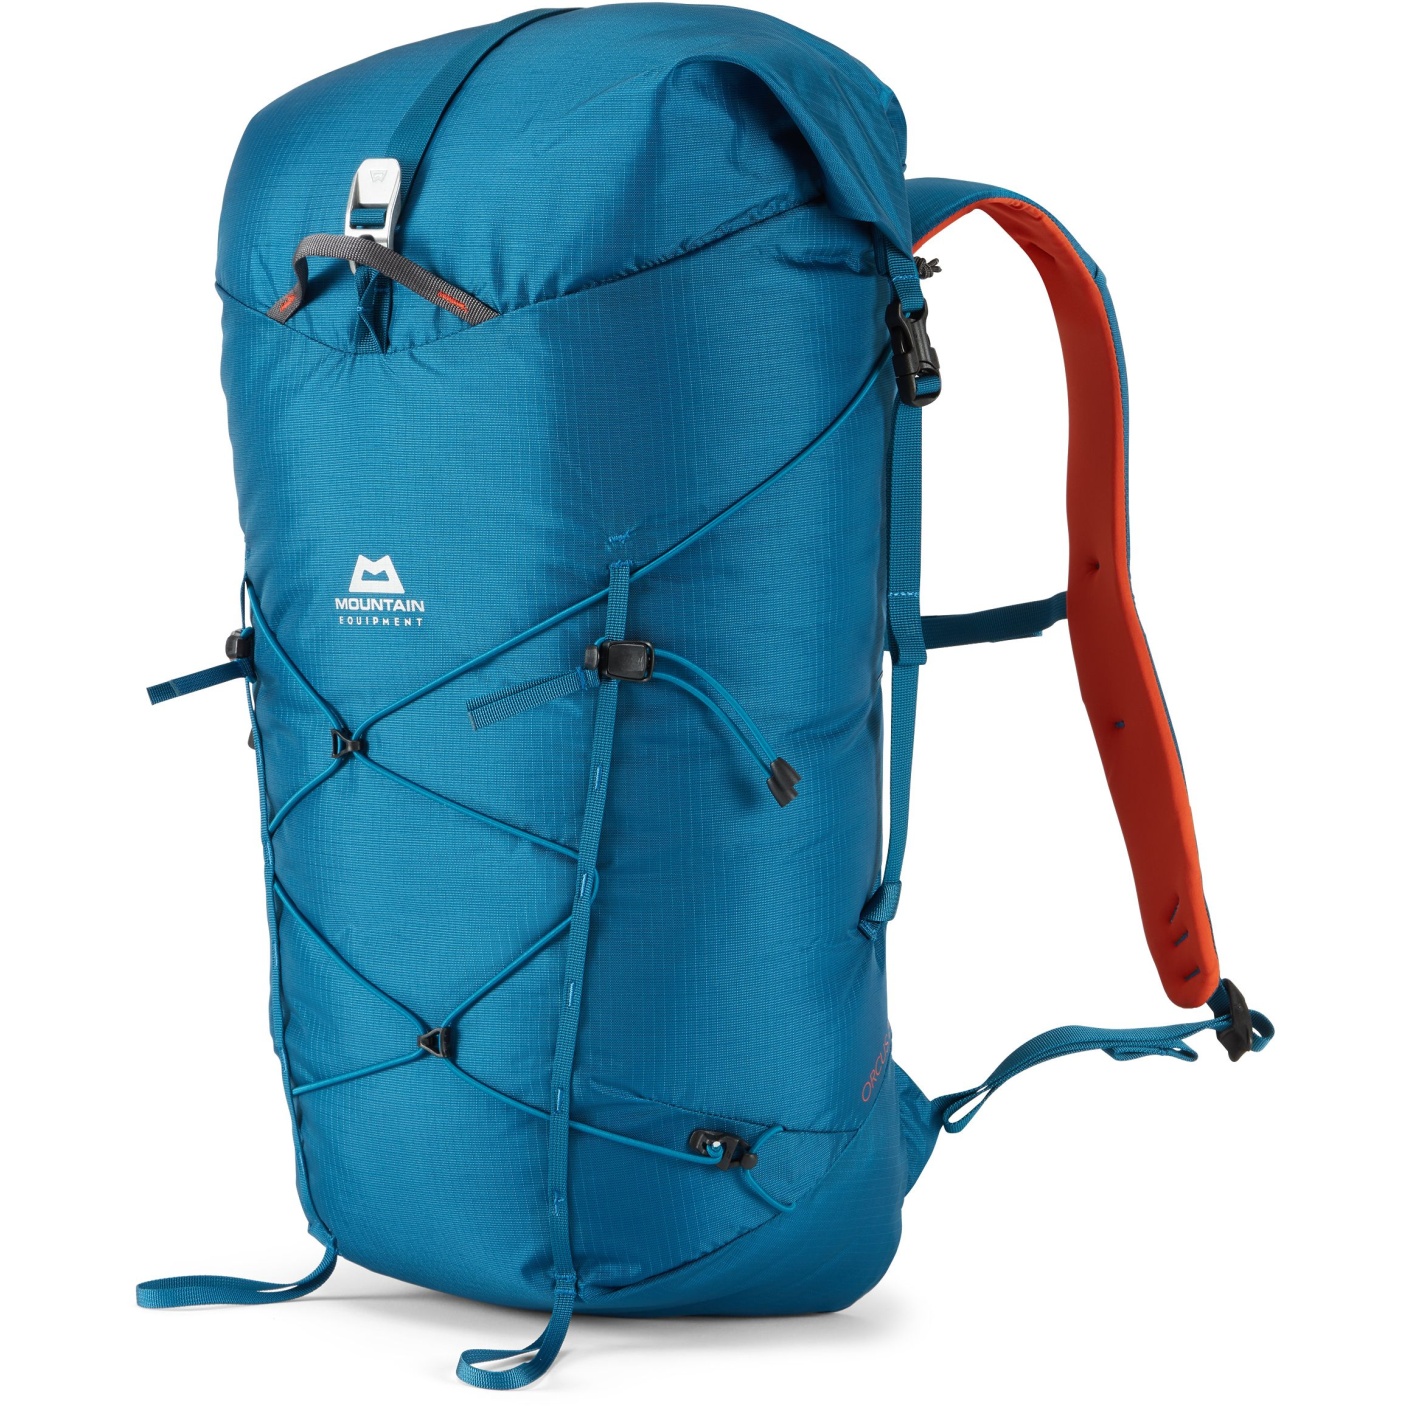 Productfoto van Mountain Equipment Orcus 28+ Backpack ME-005404 - alto blue